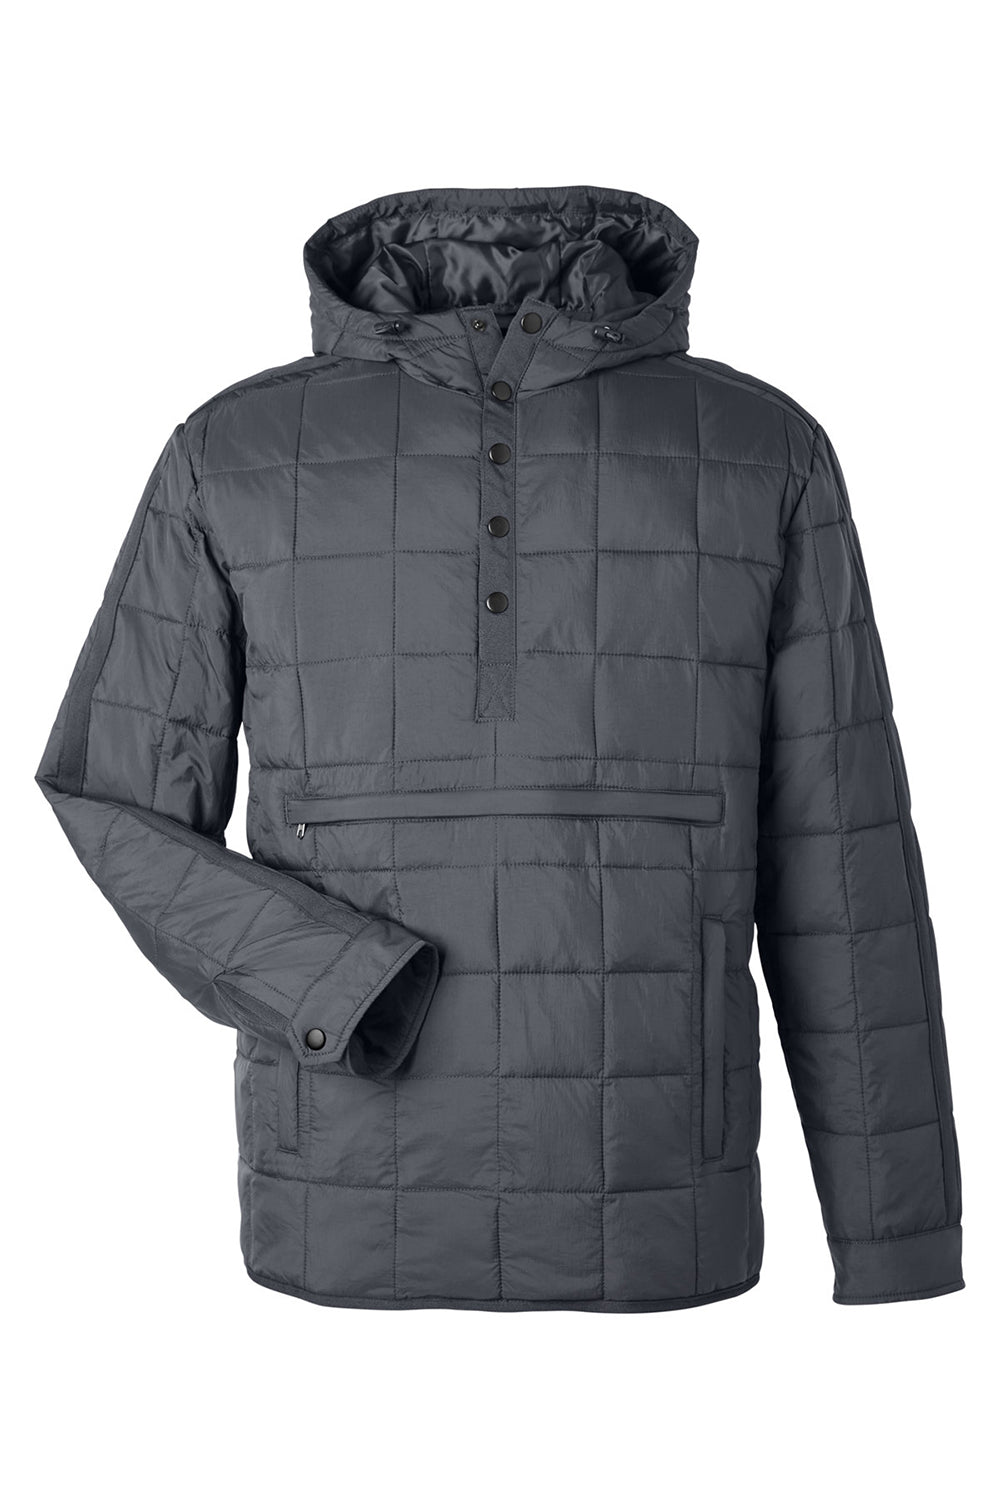 North End NE722 Mens Aura Packable Hooded Anorak Jacket Carbon Grey Flat Front